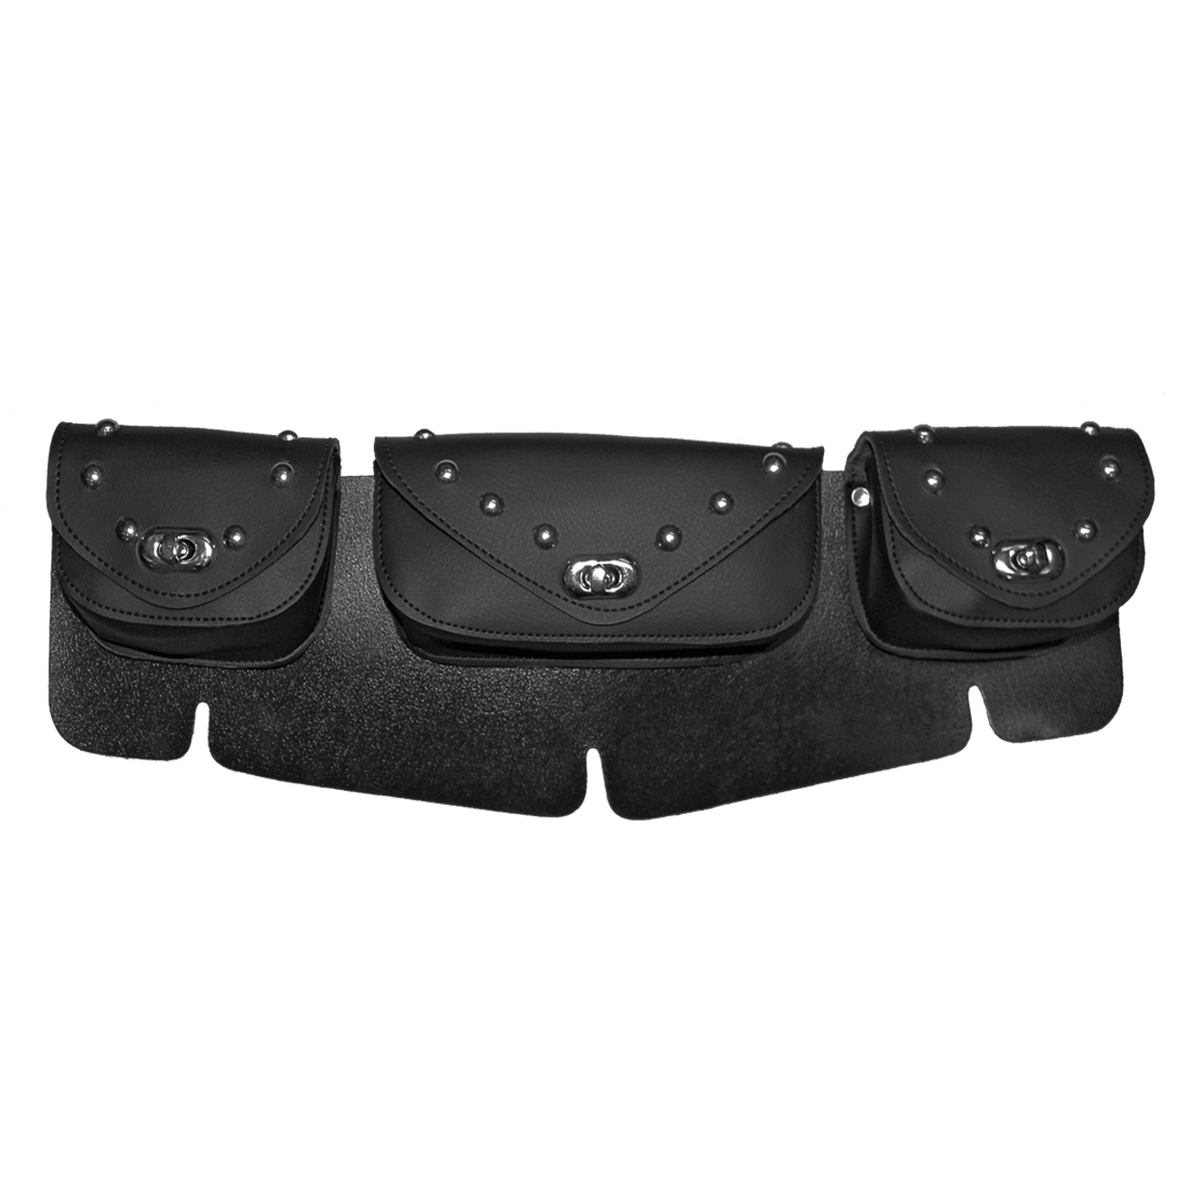 VS188 3 Compartment Studded Windshield Bag